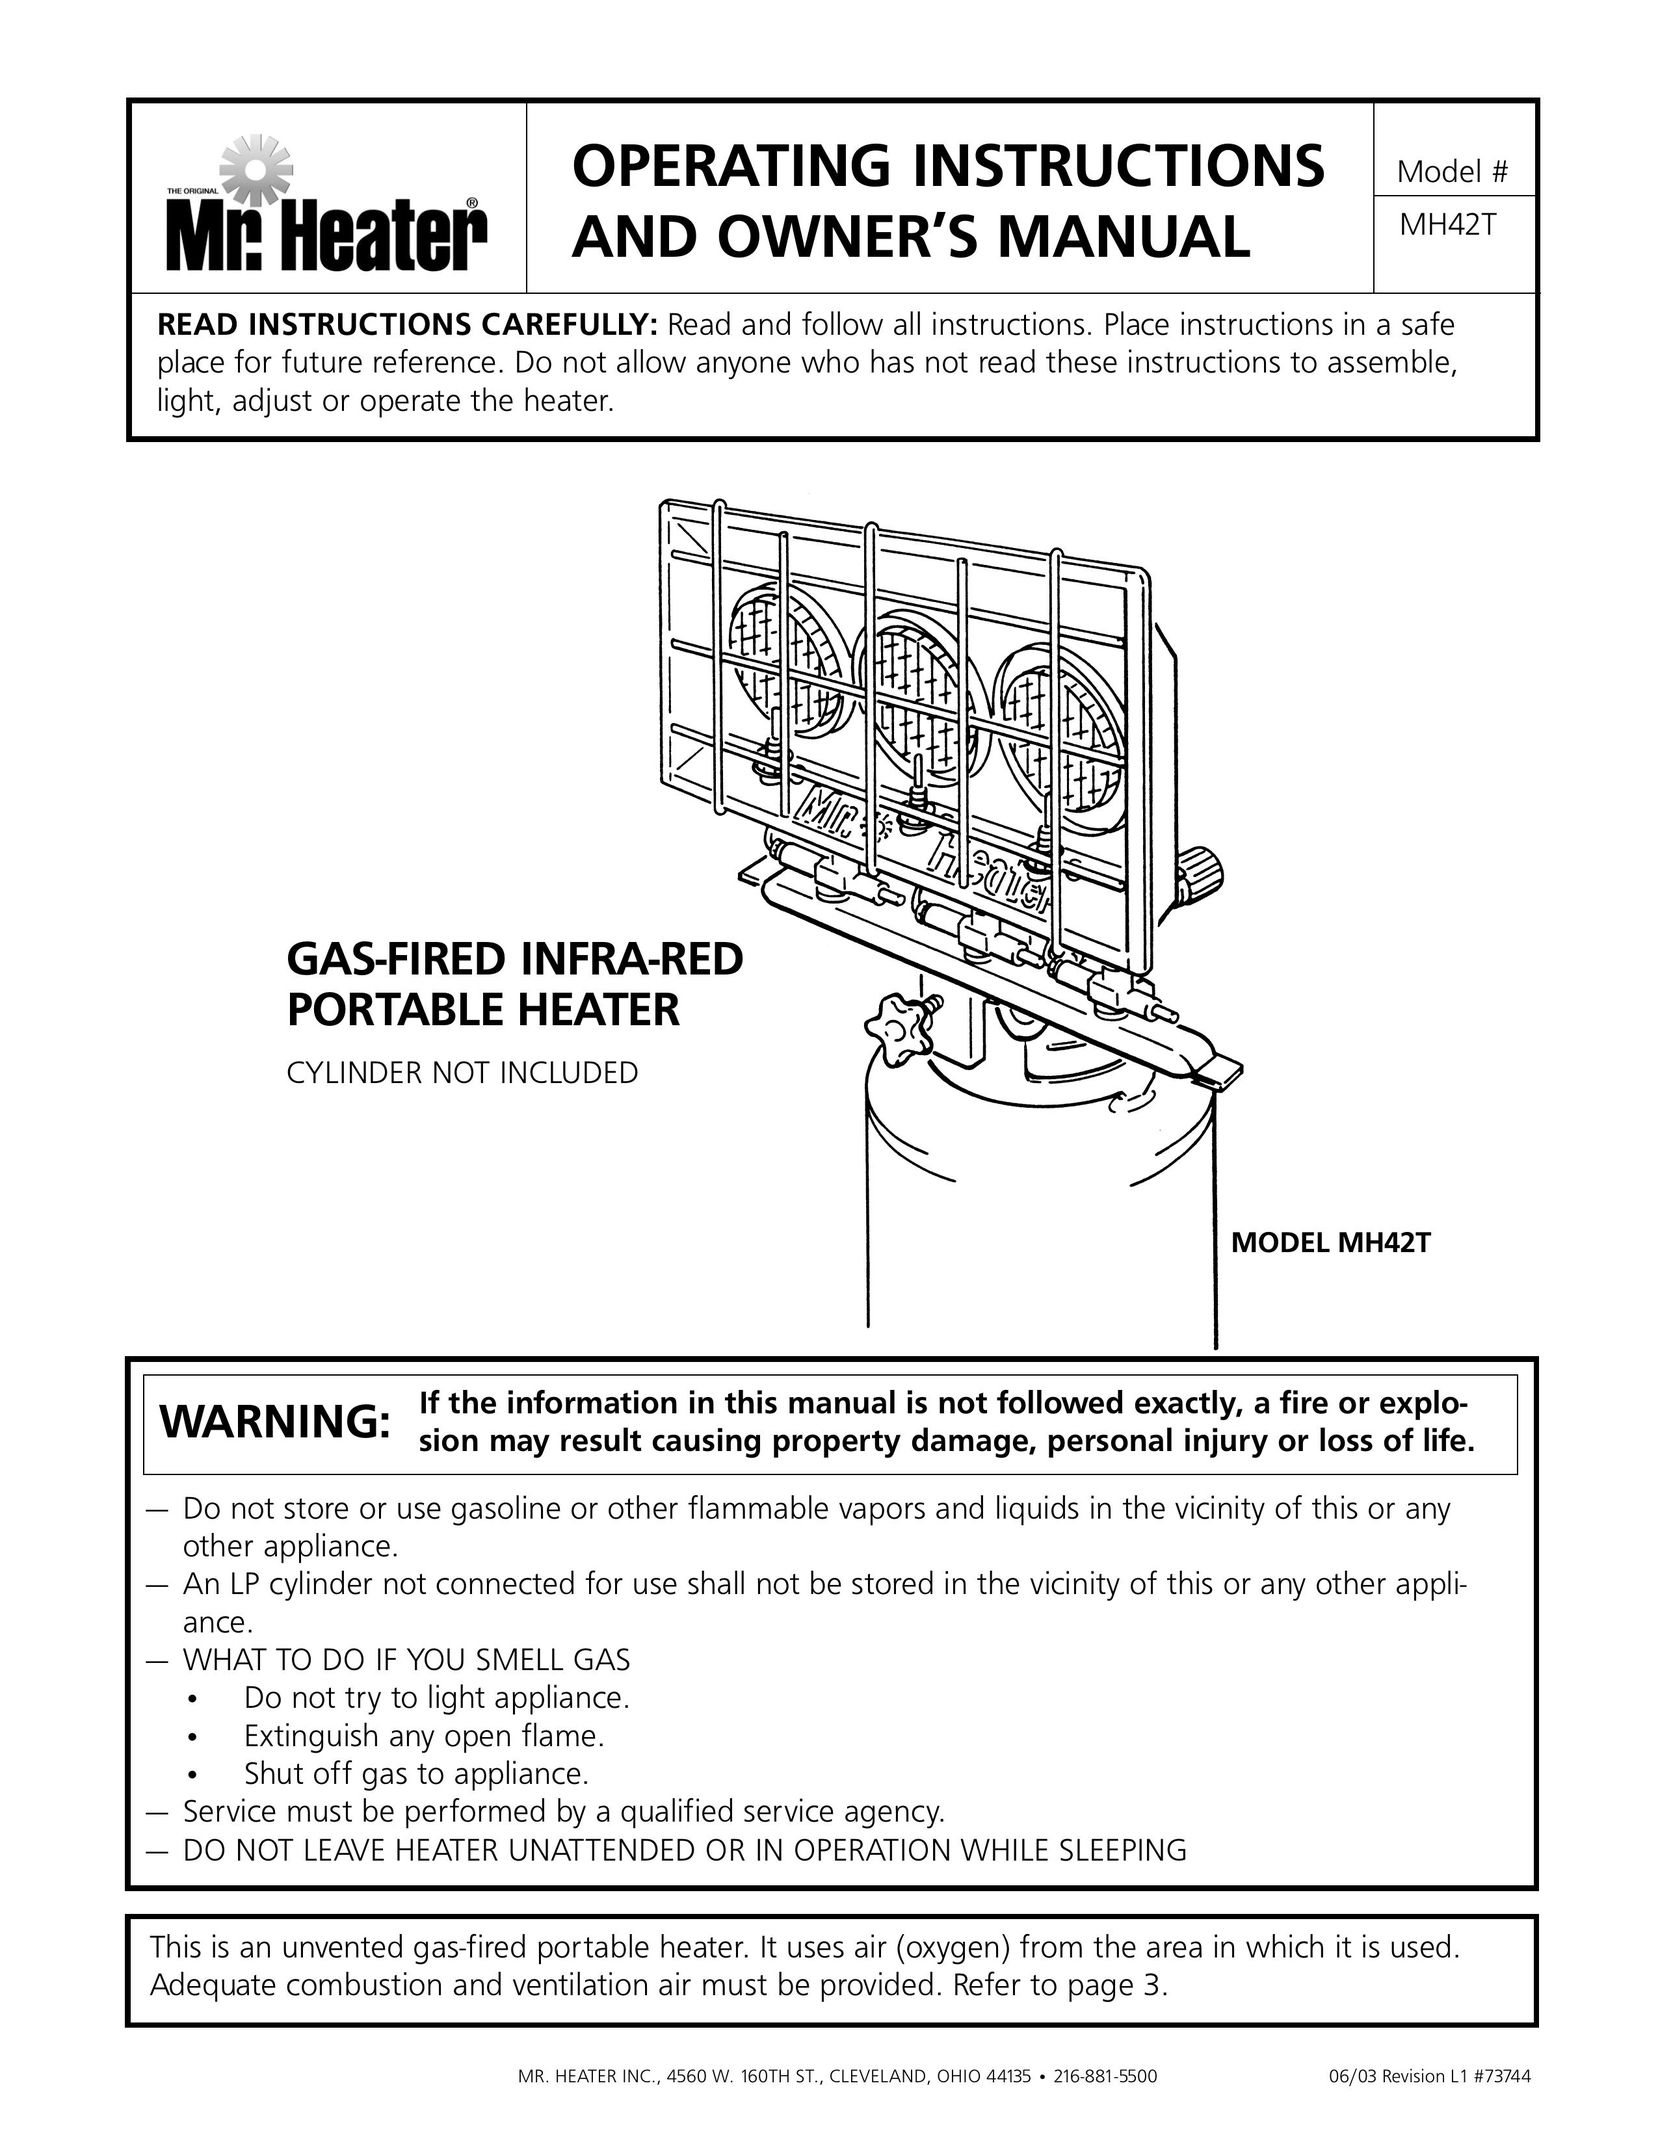 Enerco MH42T Electric Heater User Manual